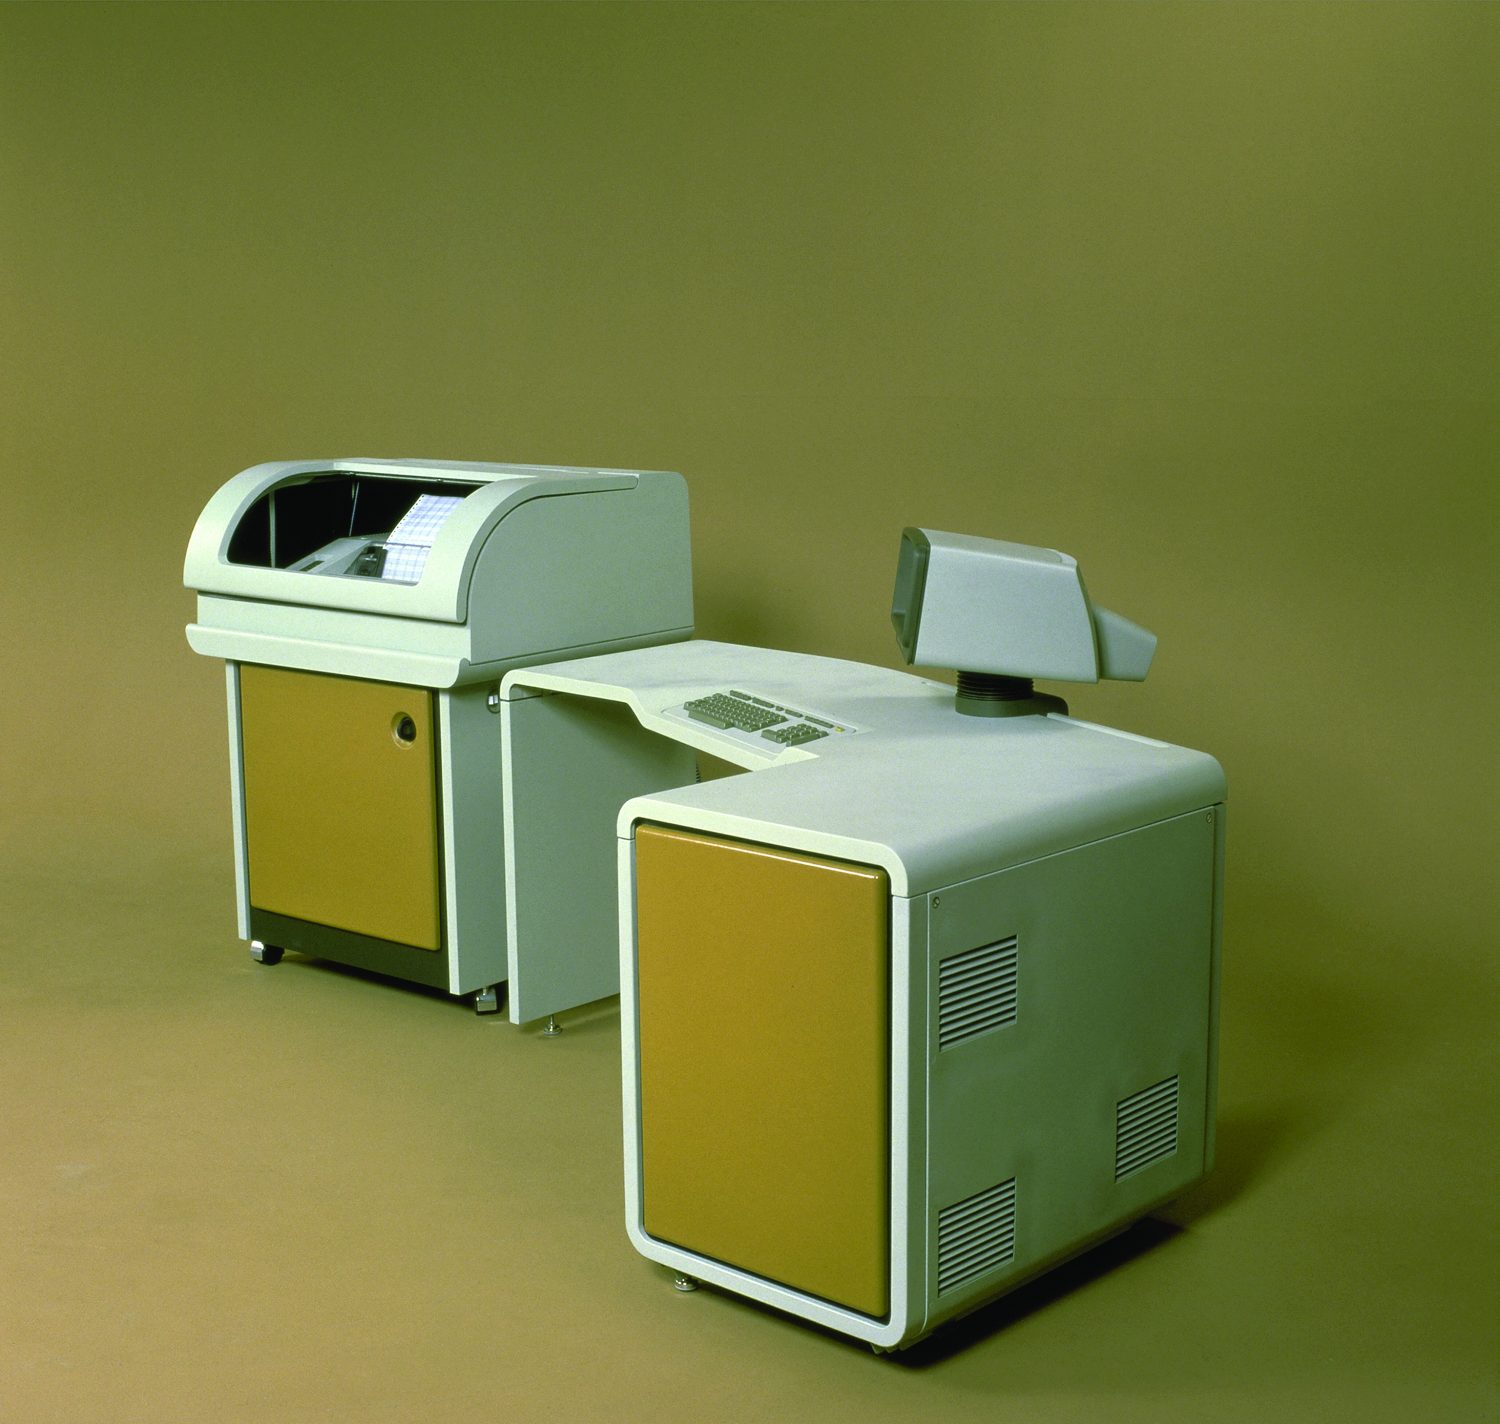 A photo of the HP 250 Business Computer with its integrated desk design.